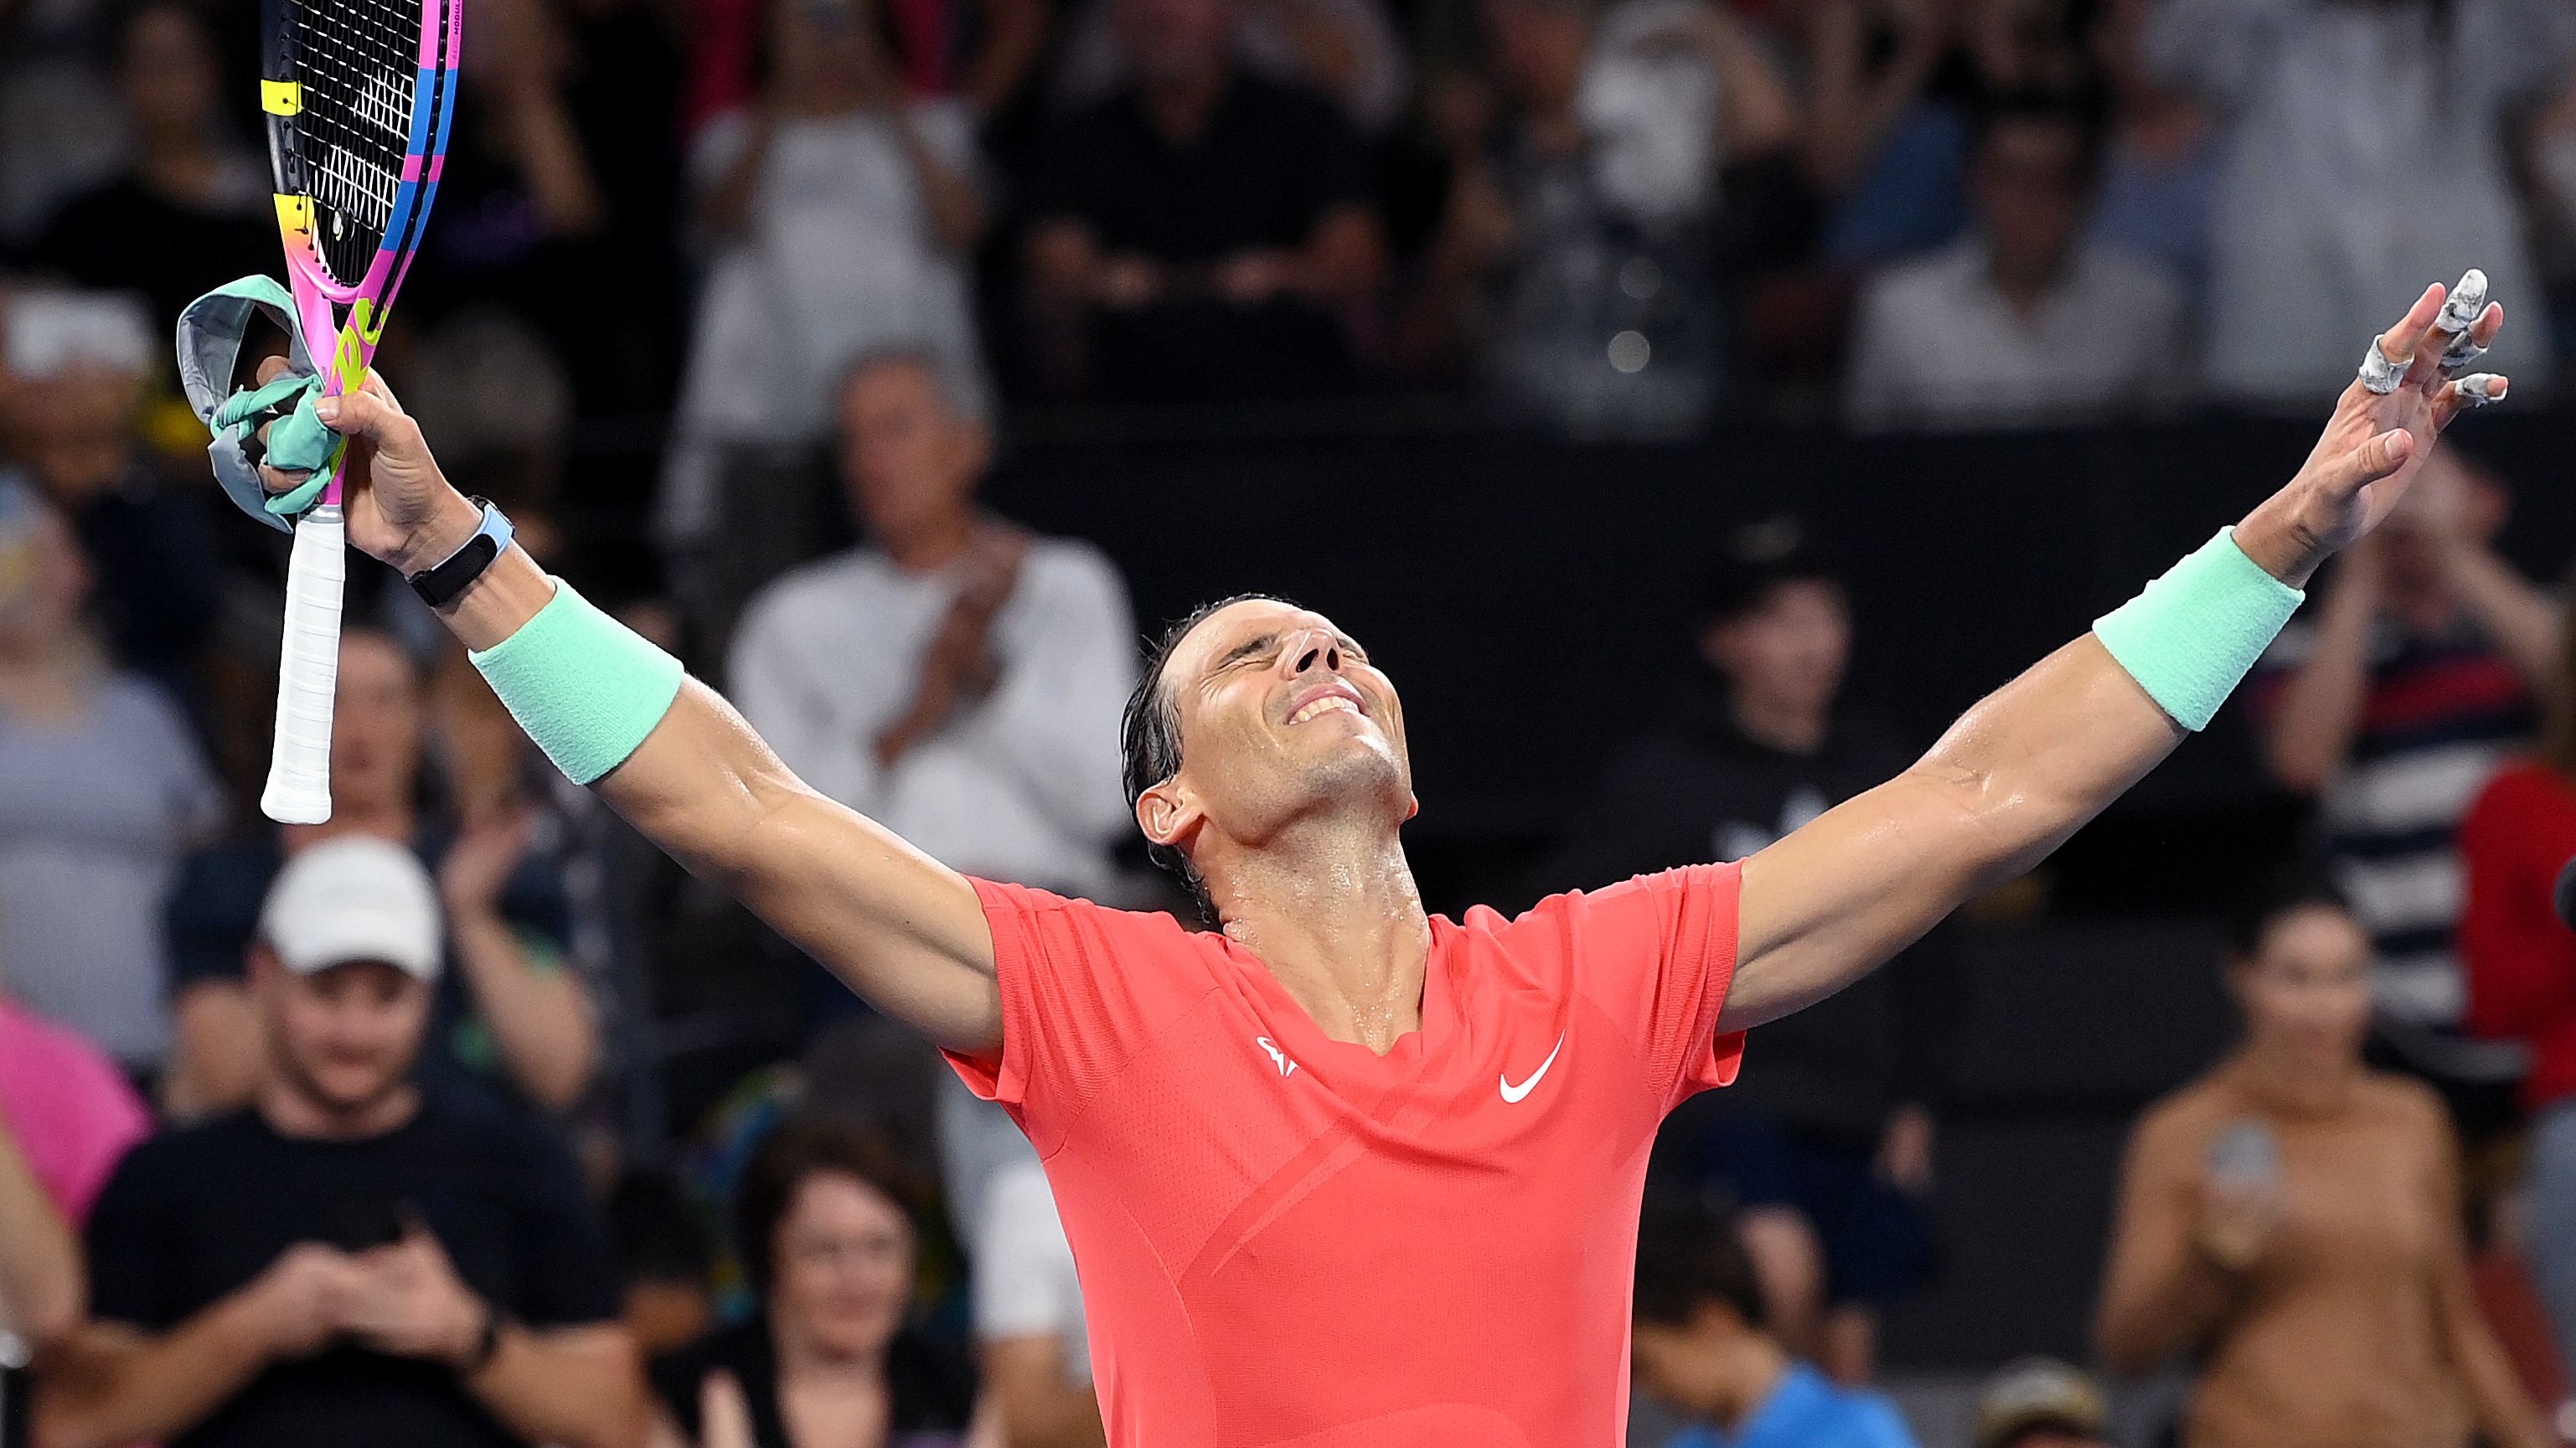 Nadal was spirited in his victory.